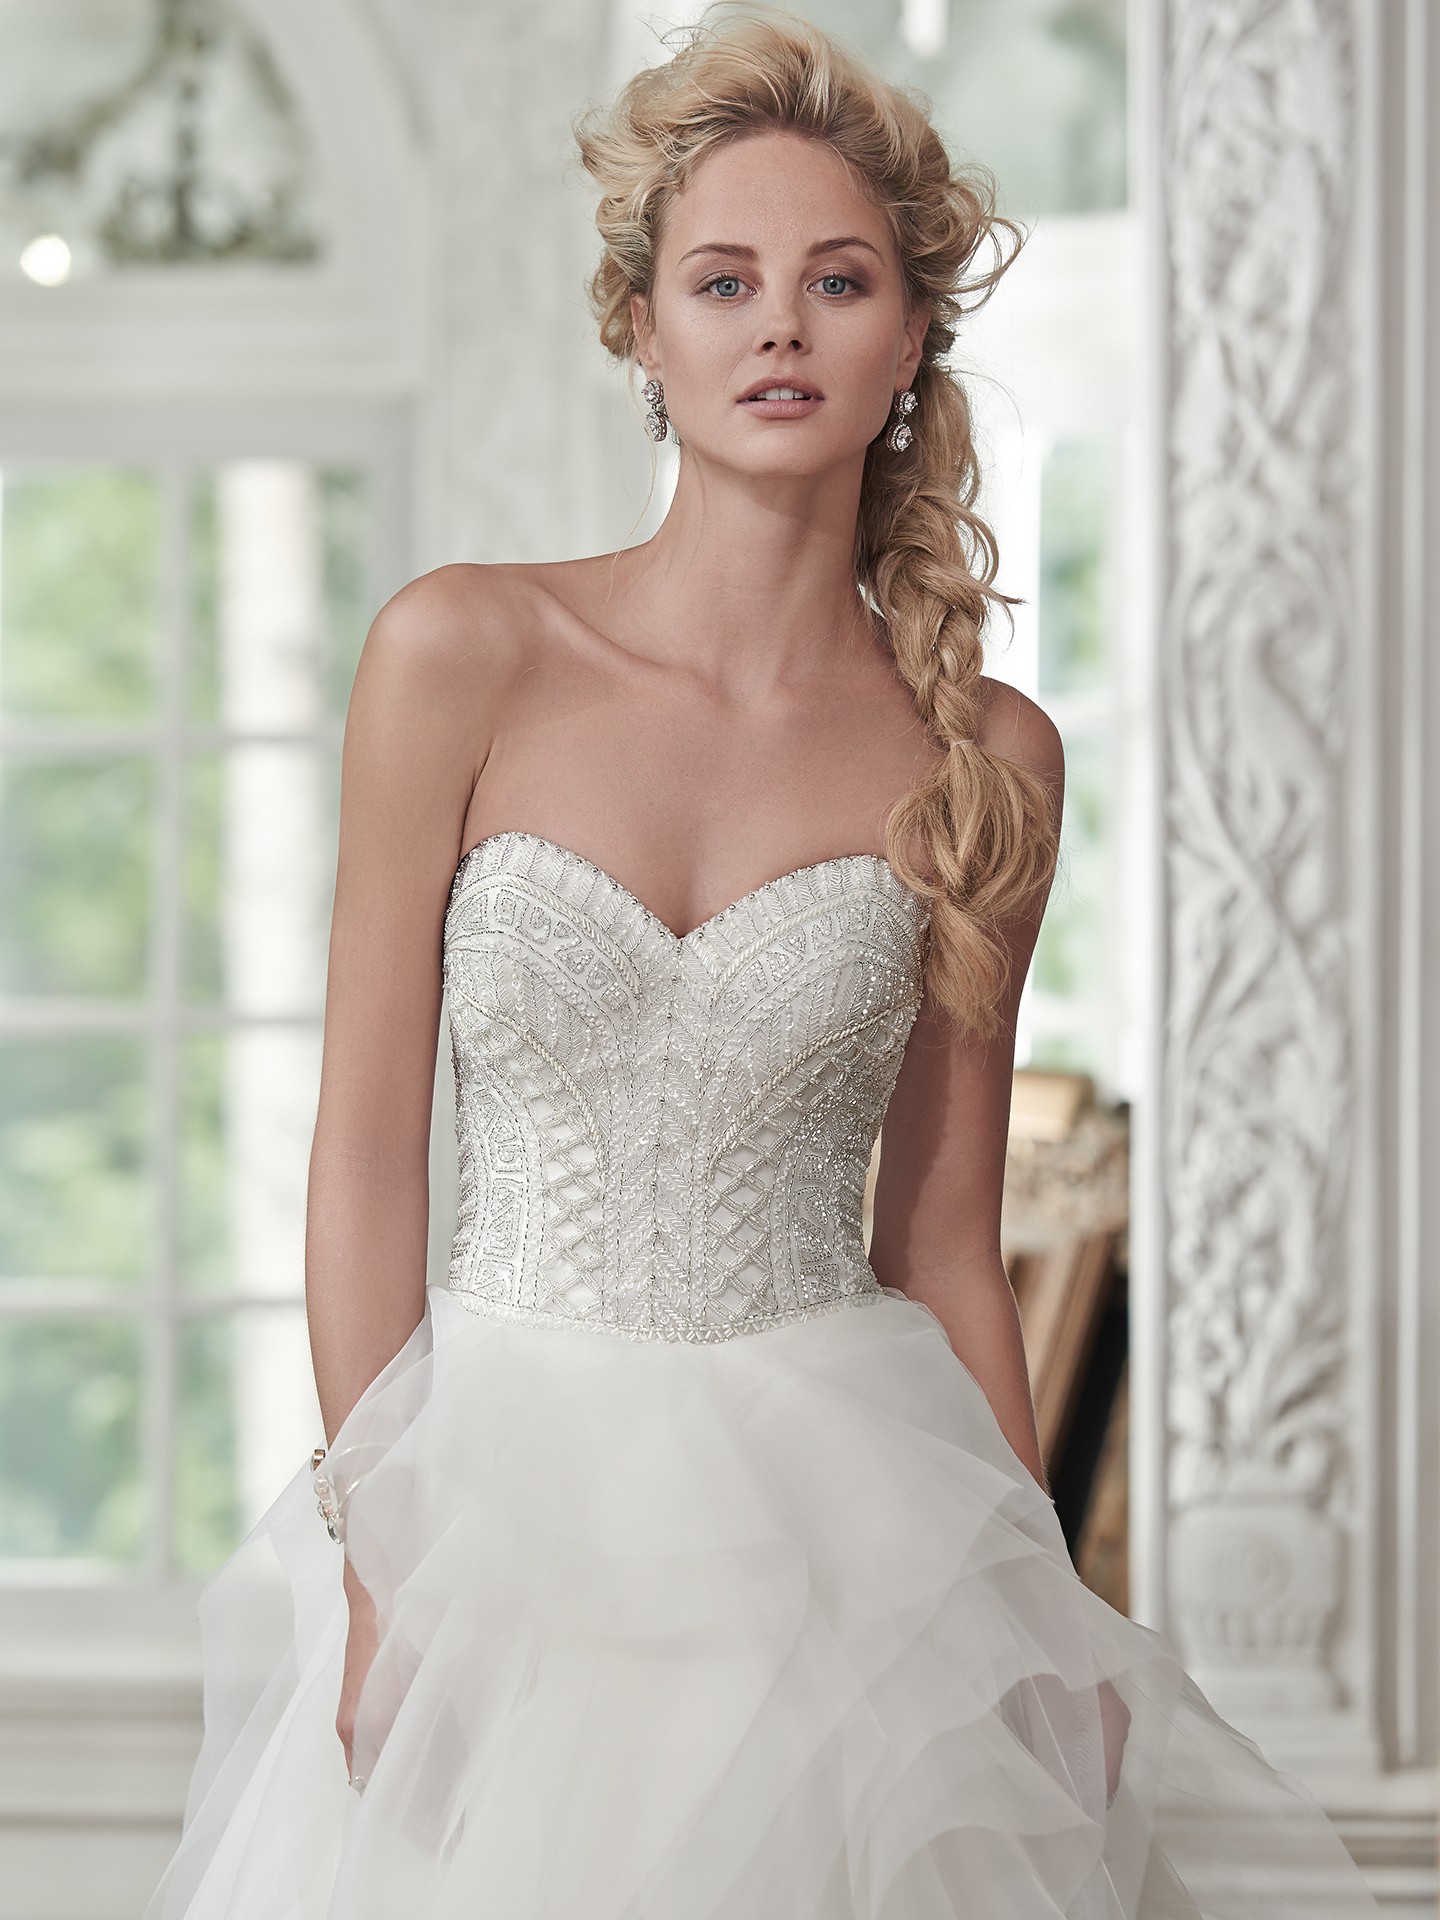 Lightweight tulle and Chic organza create the breathtaking skirt of the Ohara ball gown wedding dress, with sparkling beaded bodice and romantic sweetheart neckline completing the look. Finished with covered buttons over zipper and inner corset closure.